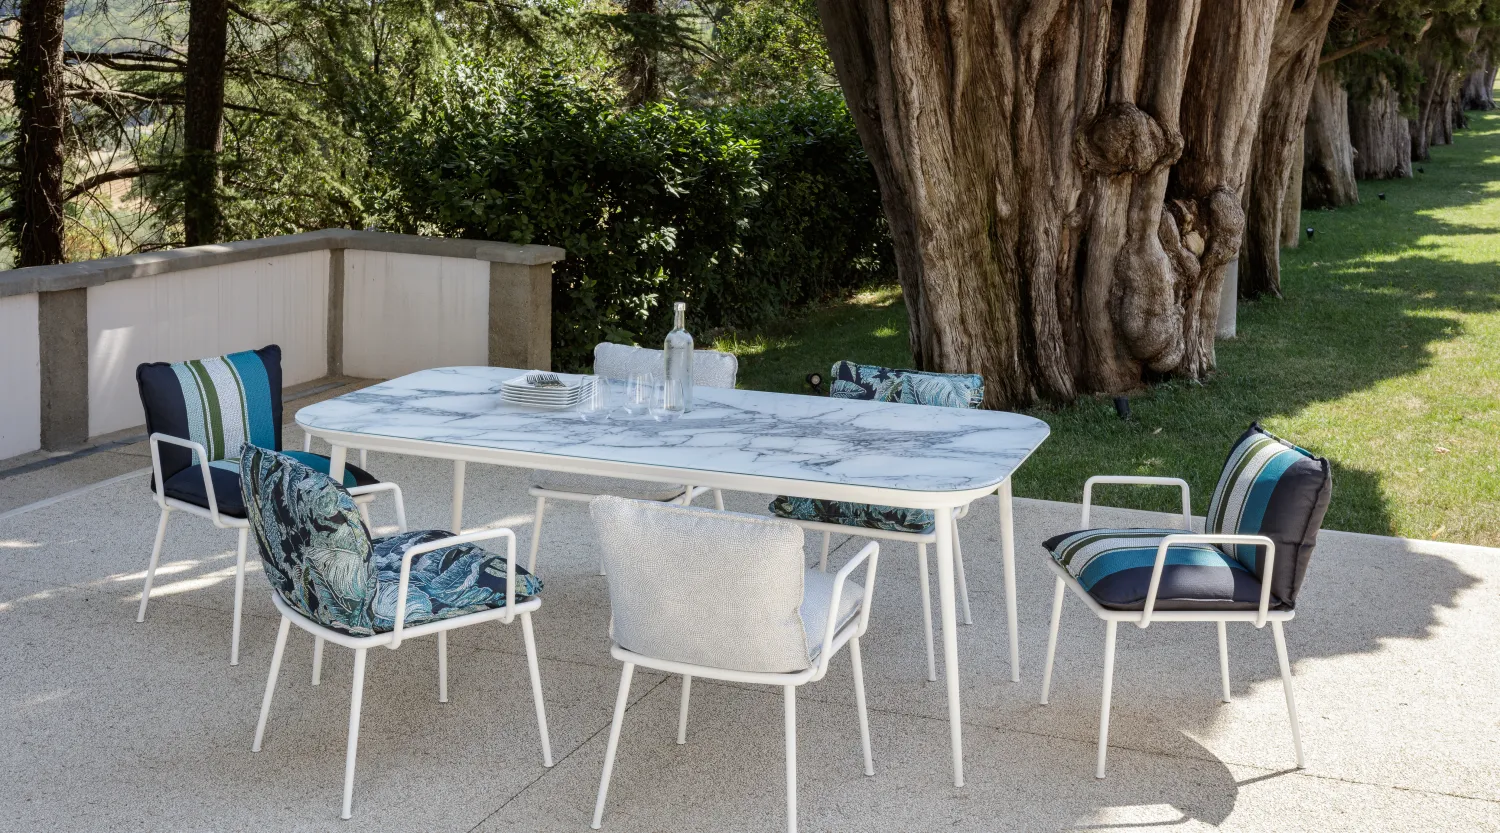 <p>The aperitif draws to a close, and here the Filicudi outdoor table prepares to welcome delicious but light summer dishes.</p>
